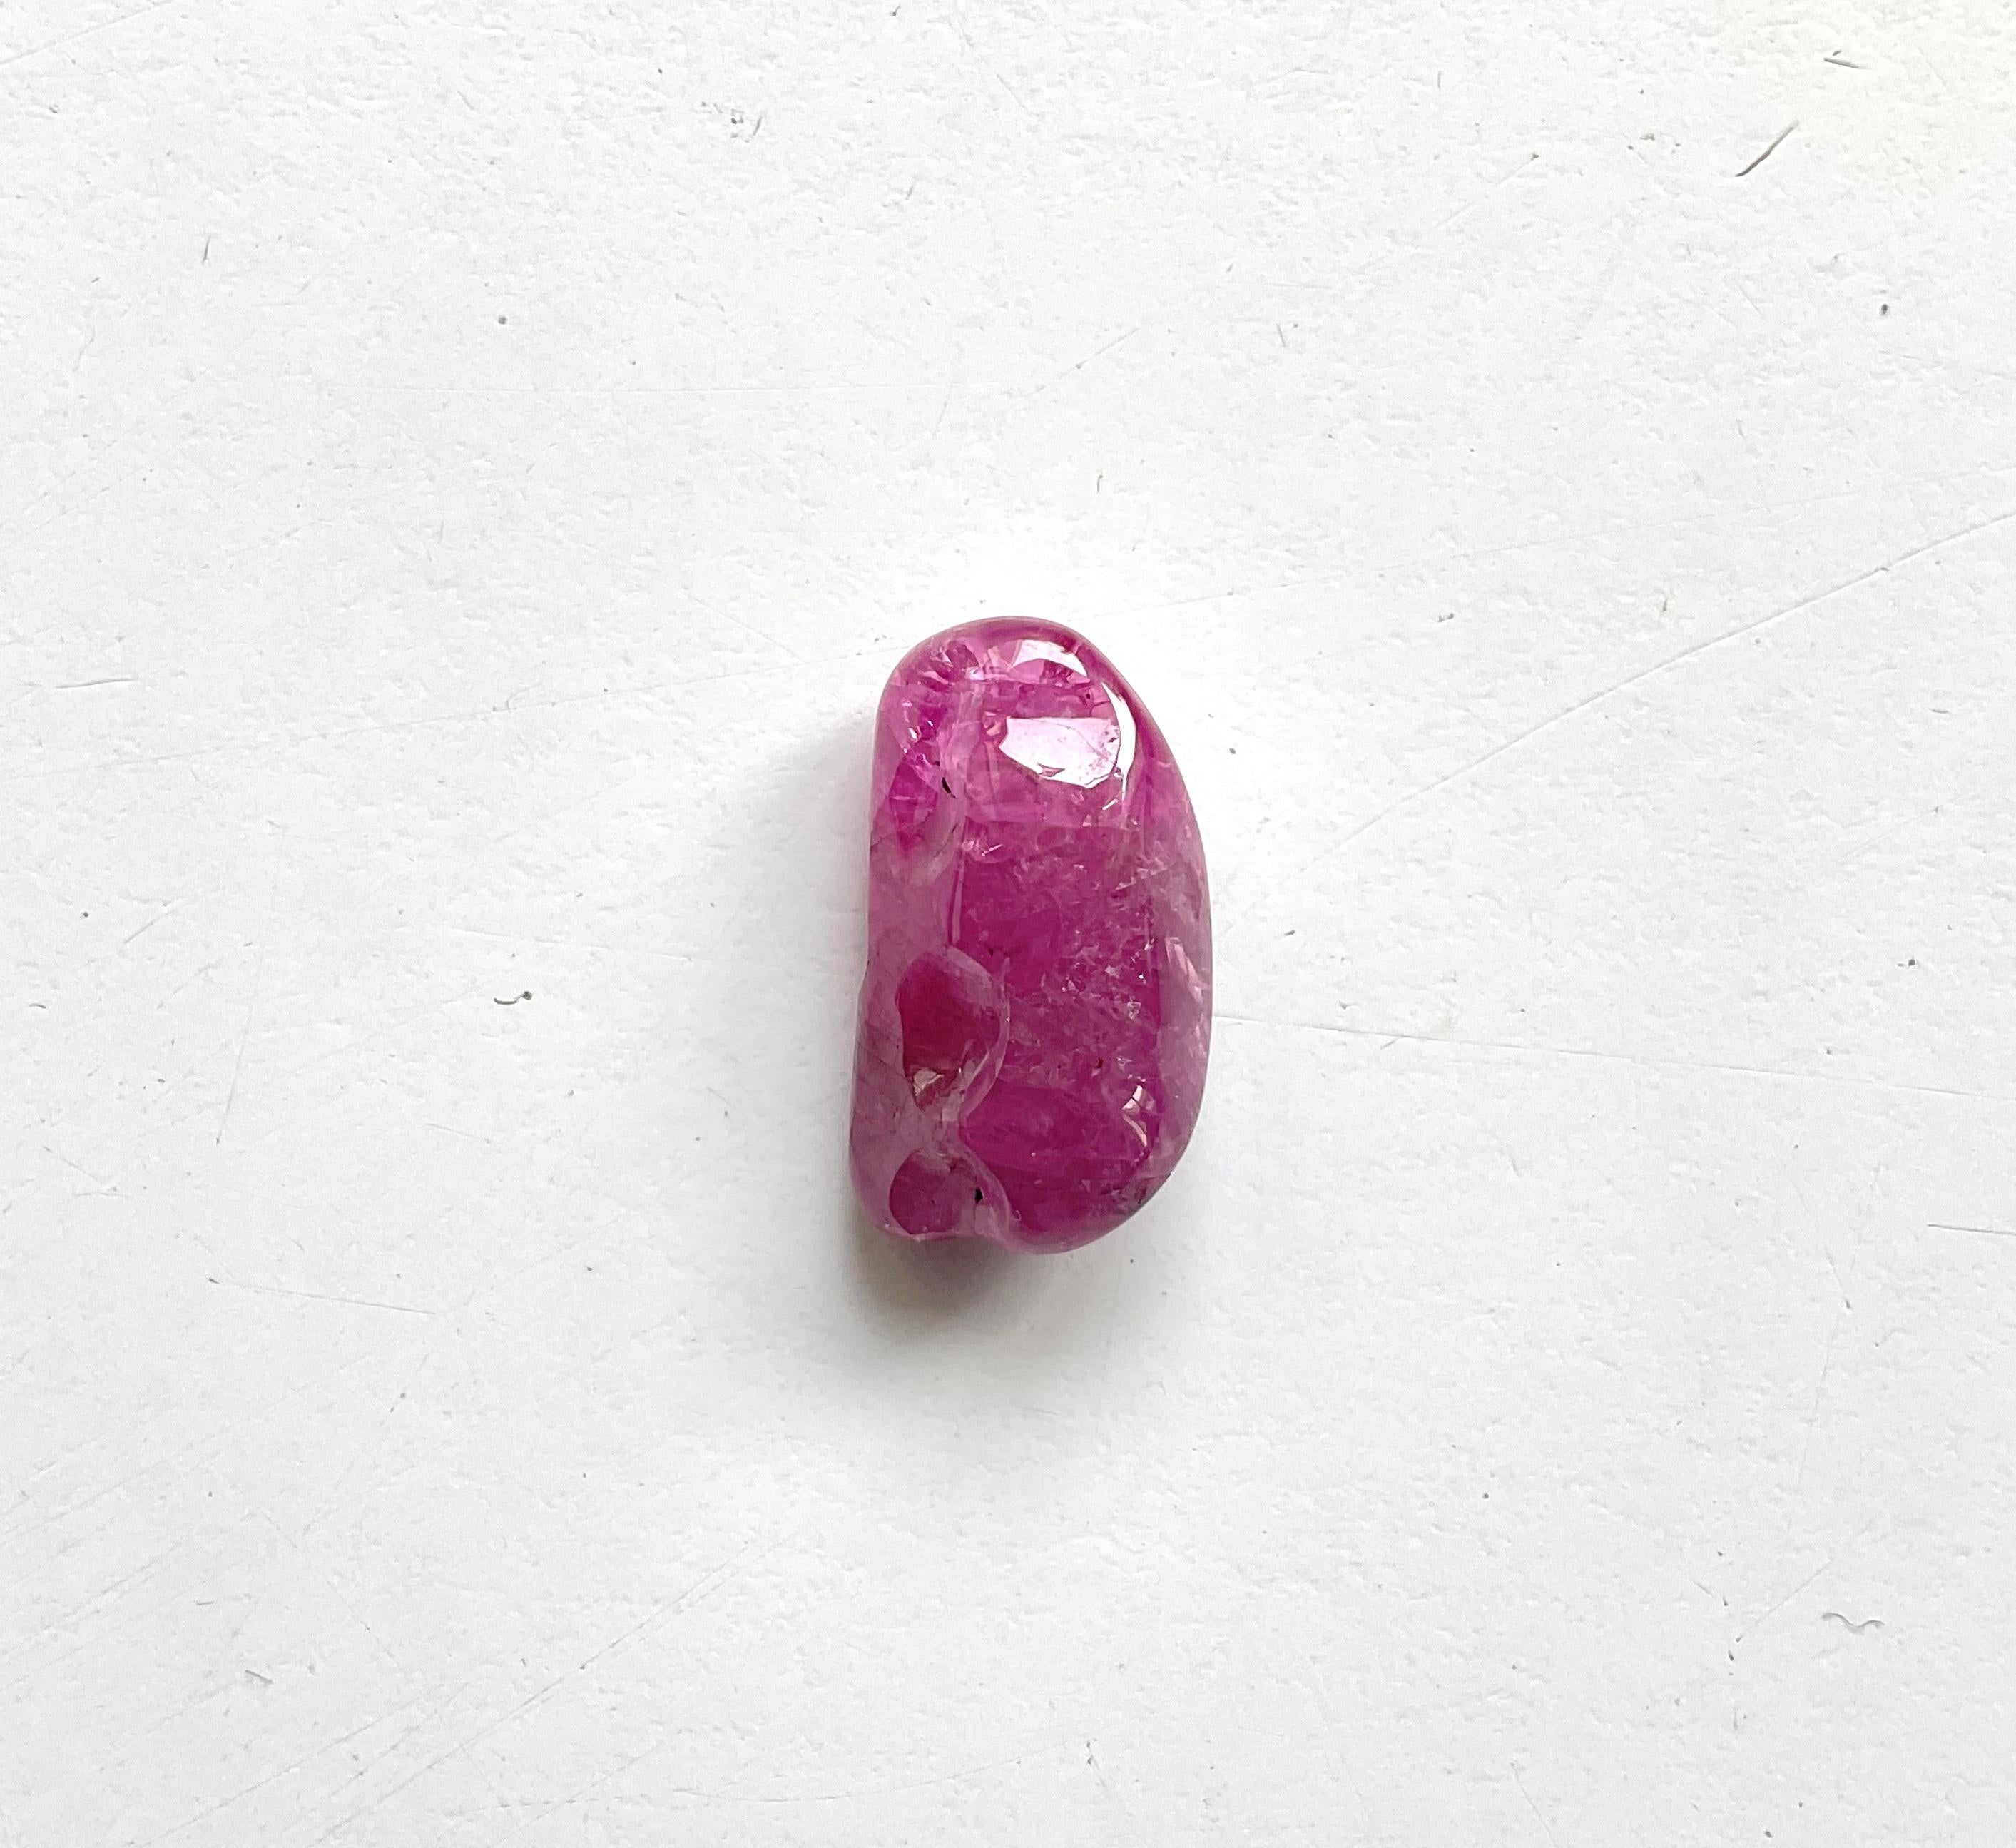 Cabochon 23.88 Carat Burmese Ruby Tumbled Plain No-Heat Top Fine Jewelry Natural Gemstone For Sale